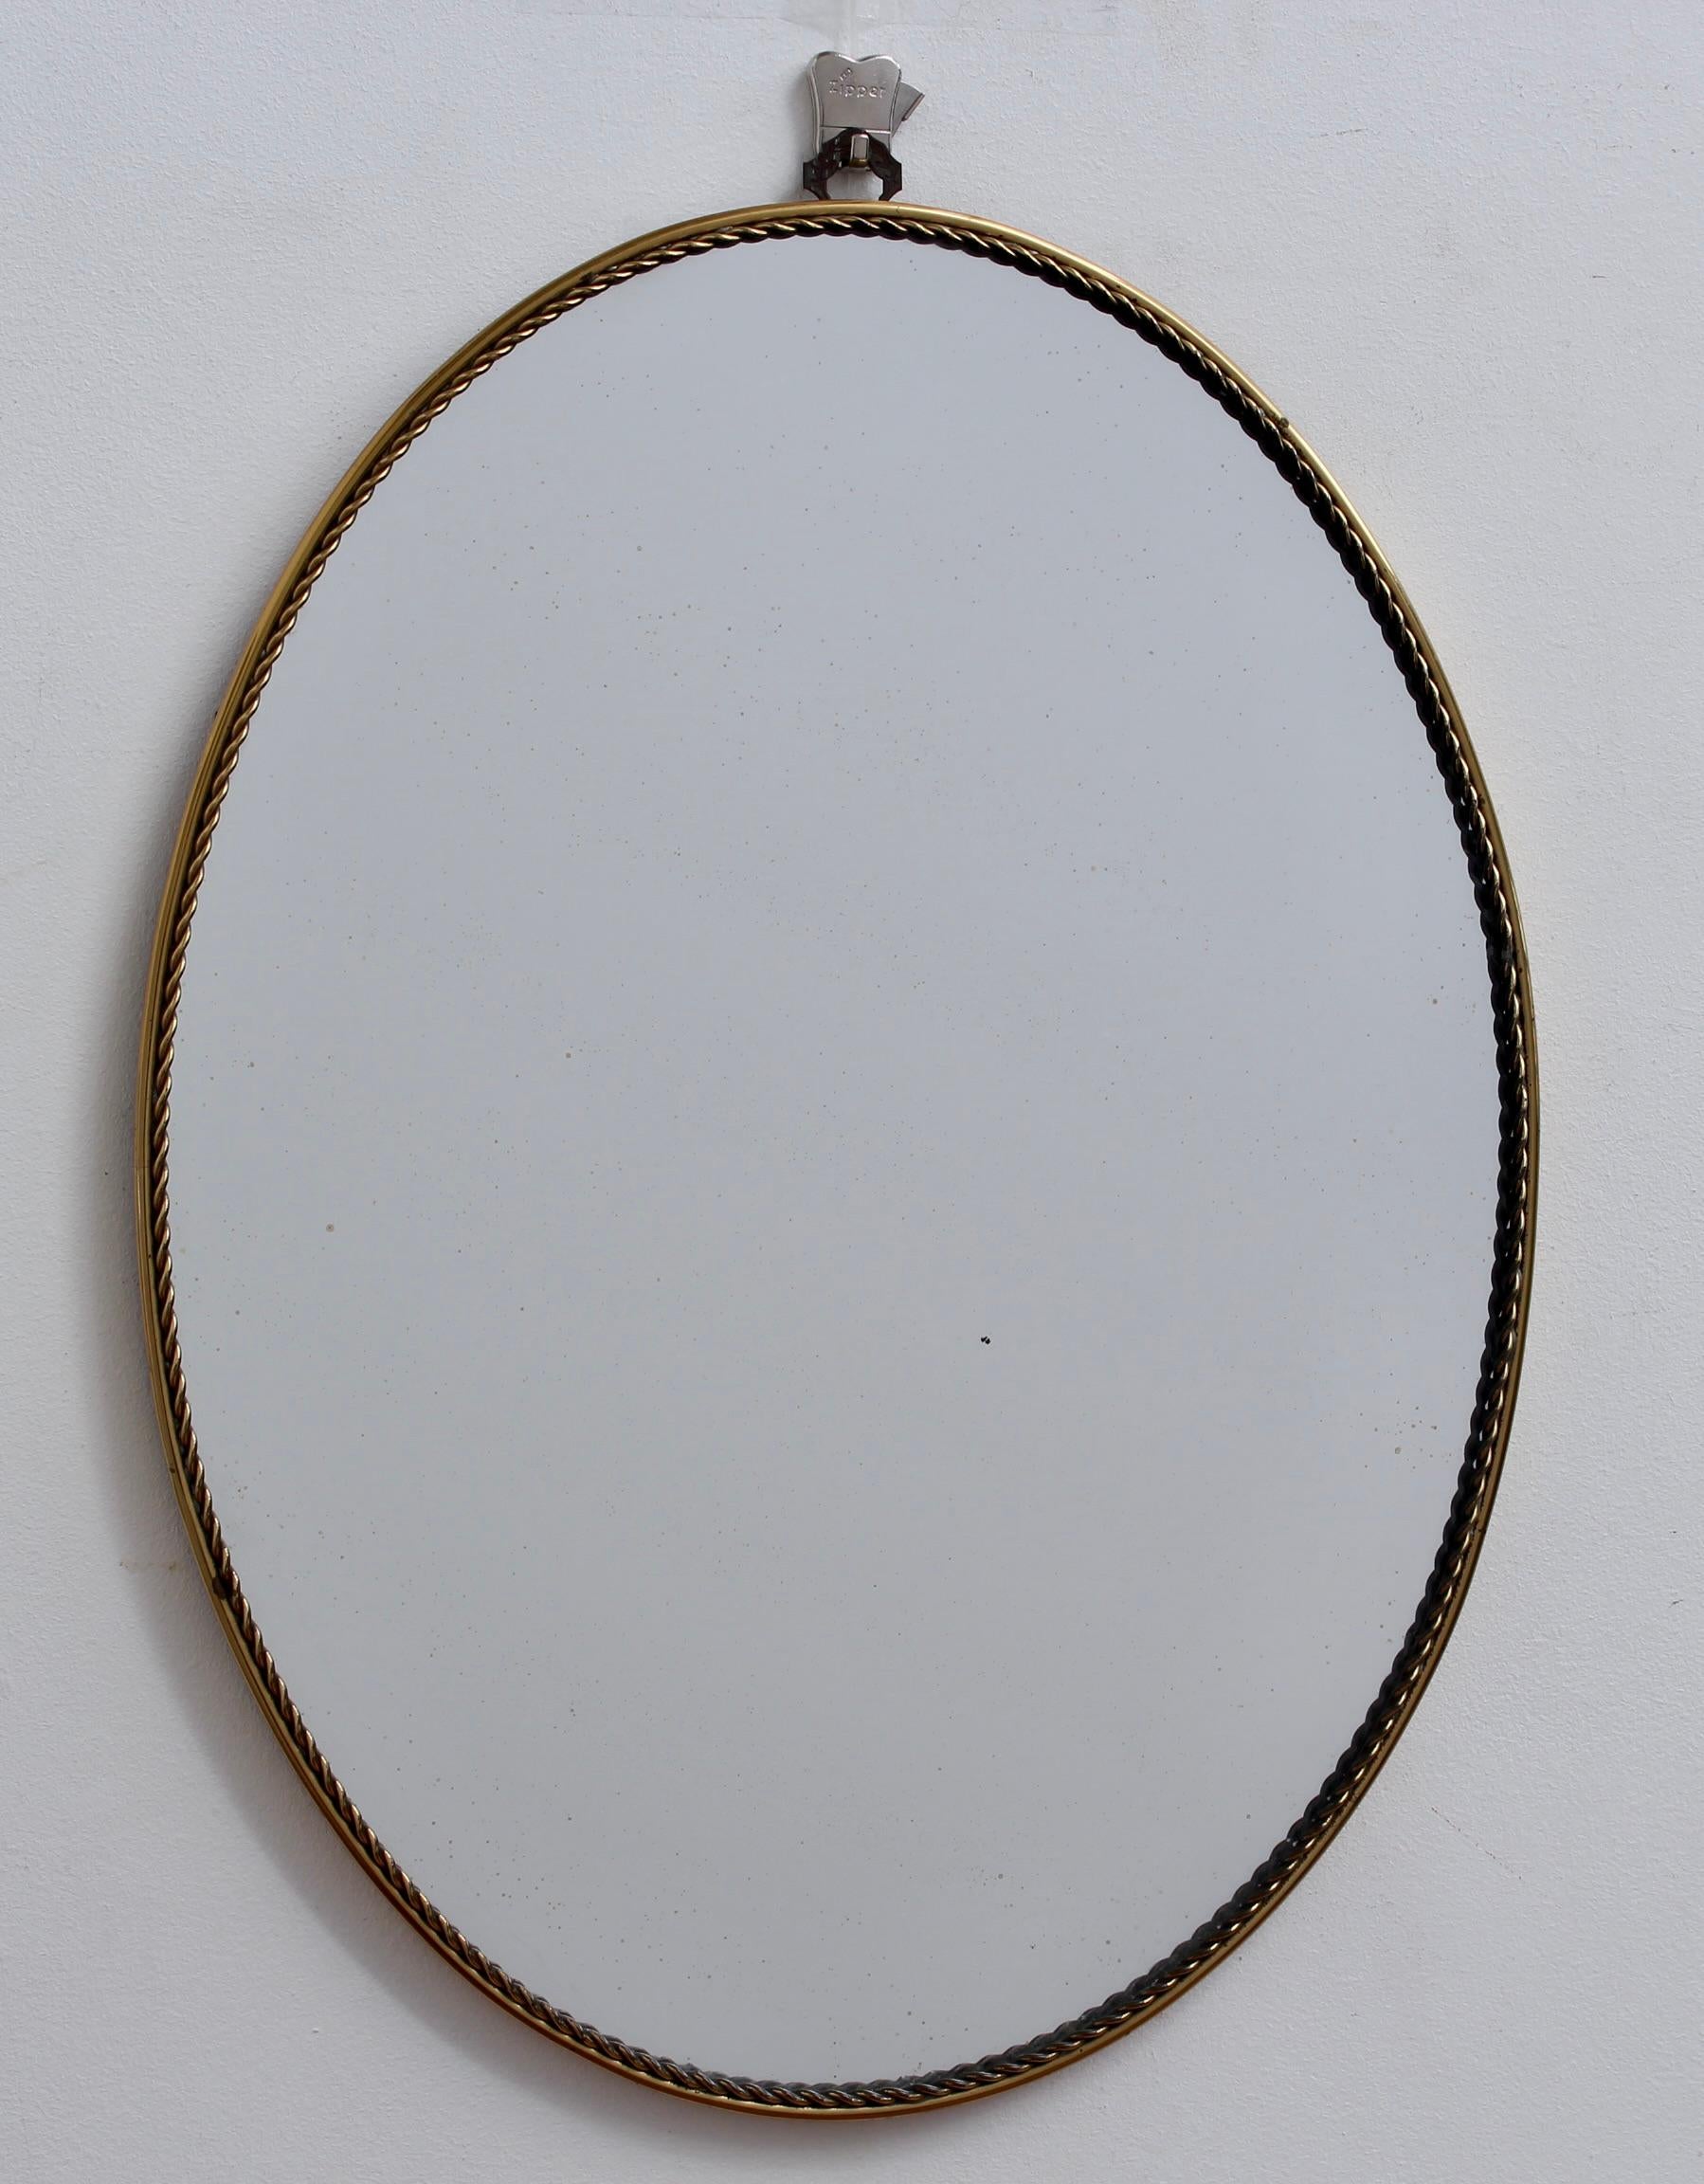 Small vintage Italian wall mirror in brass frame with stranded rope pattern (circa 1950s). The mirror has presence with a classic form and elegant good looks. The oval shape coupled with the frame's stranded rope pattern is a real find on the